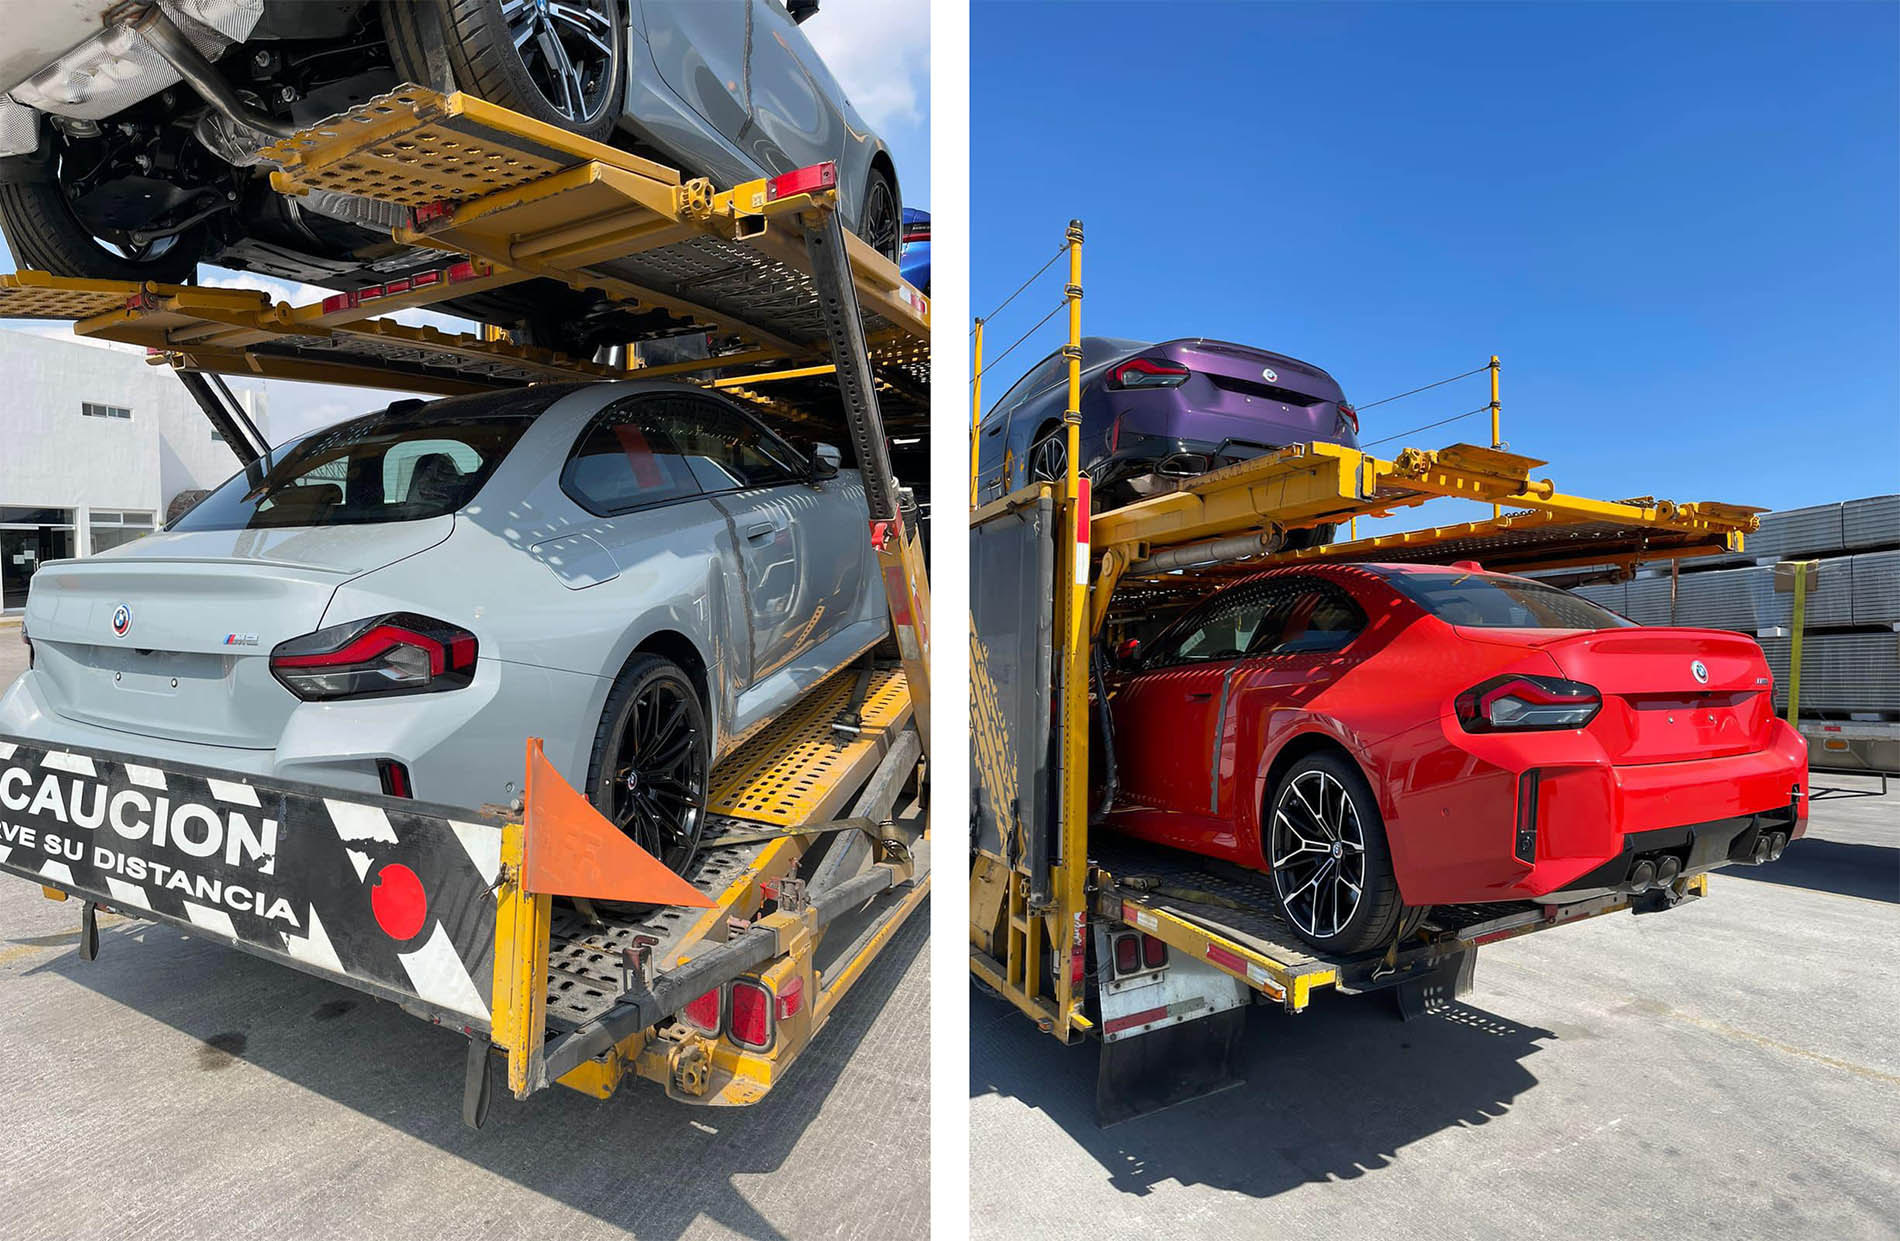 Pics: M2 Shipping Out of Potosi Factory!